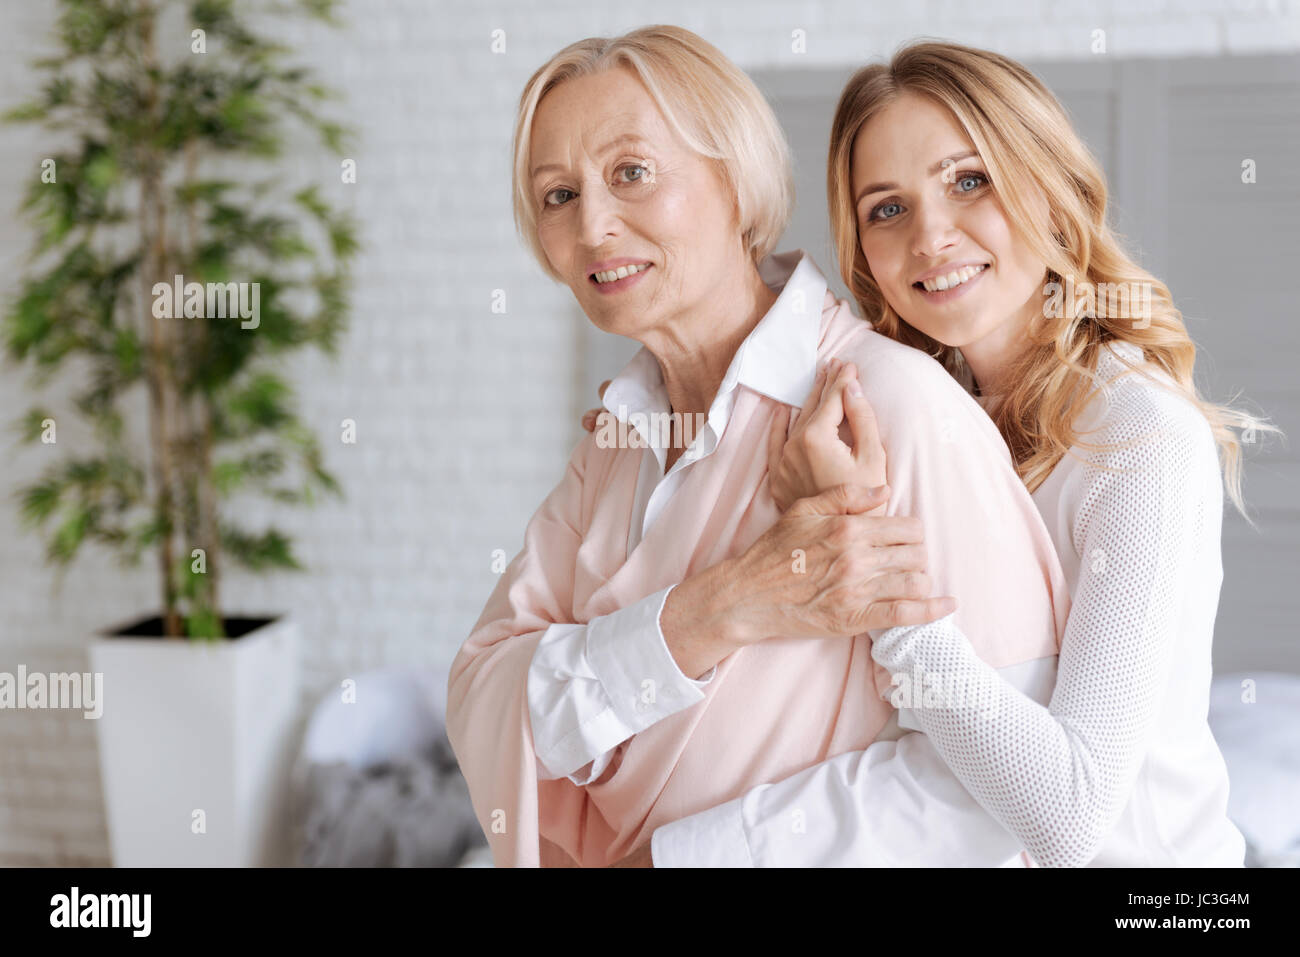 Mother covering her daughters hand embracing her Stock Photo